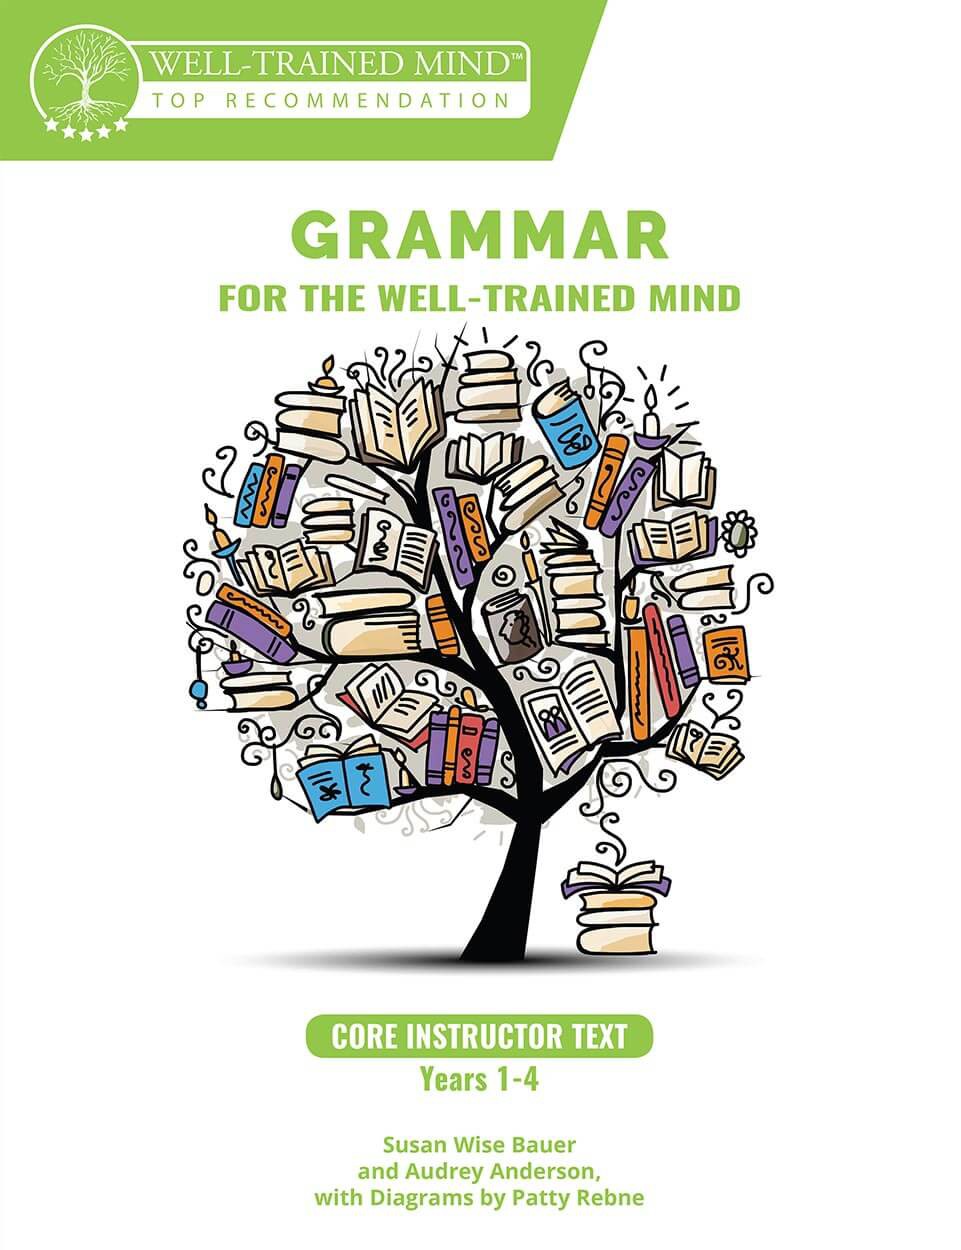 Grammar for the Well-Trained Mind: Core Instructor Text by Susan Wise-Bauer